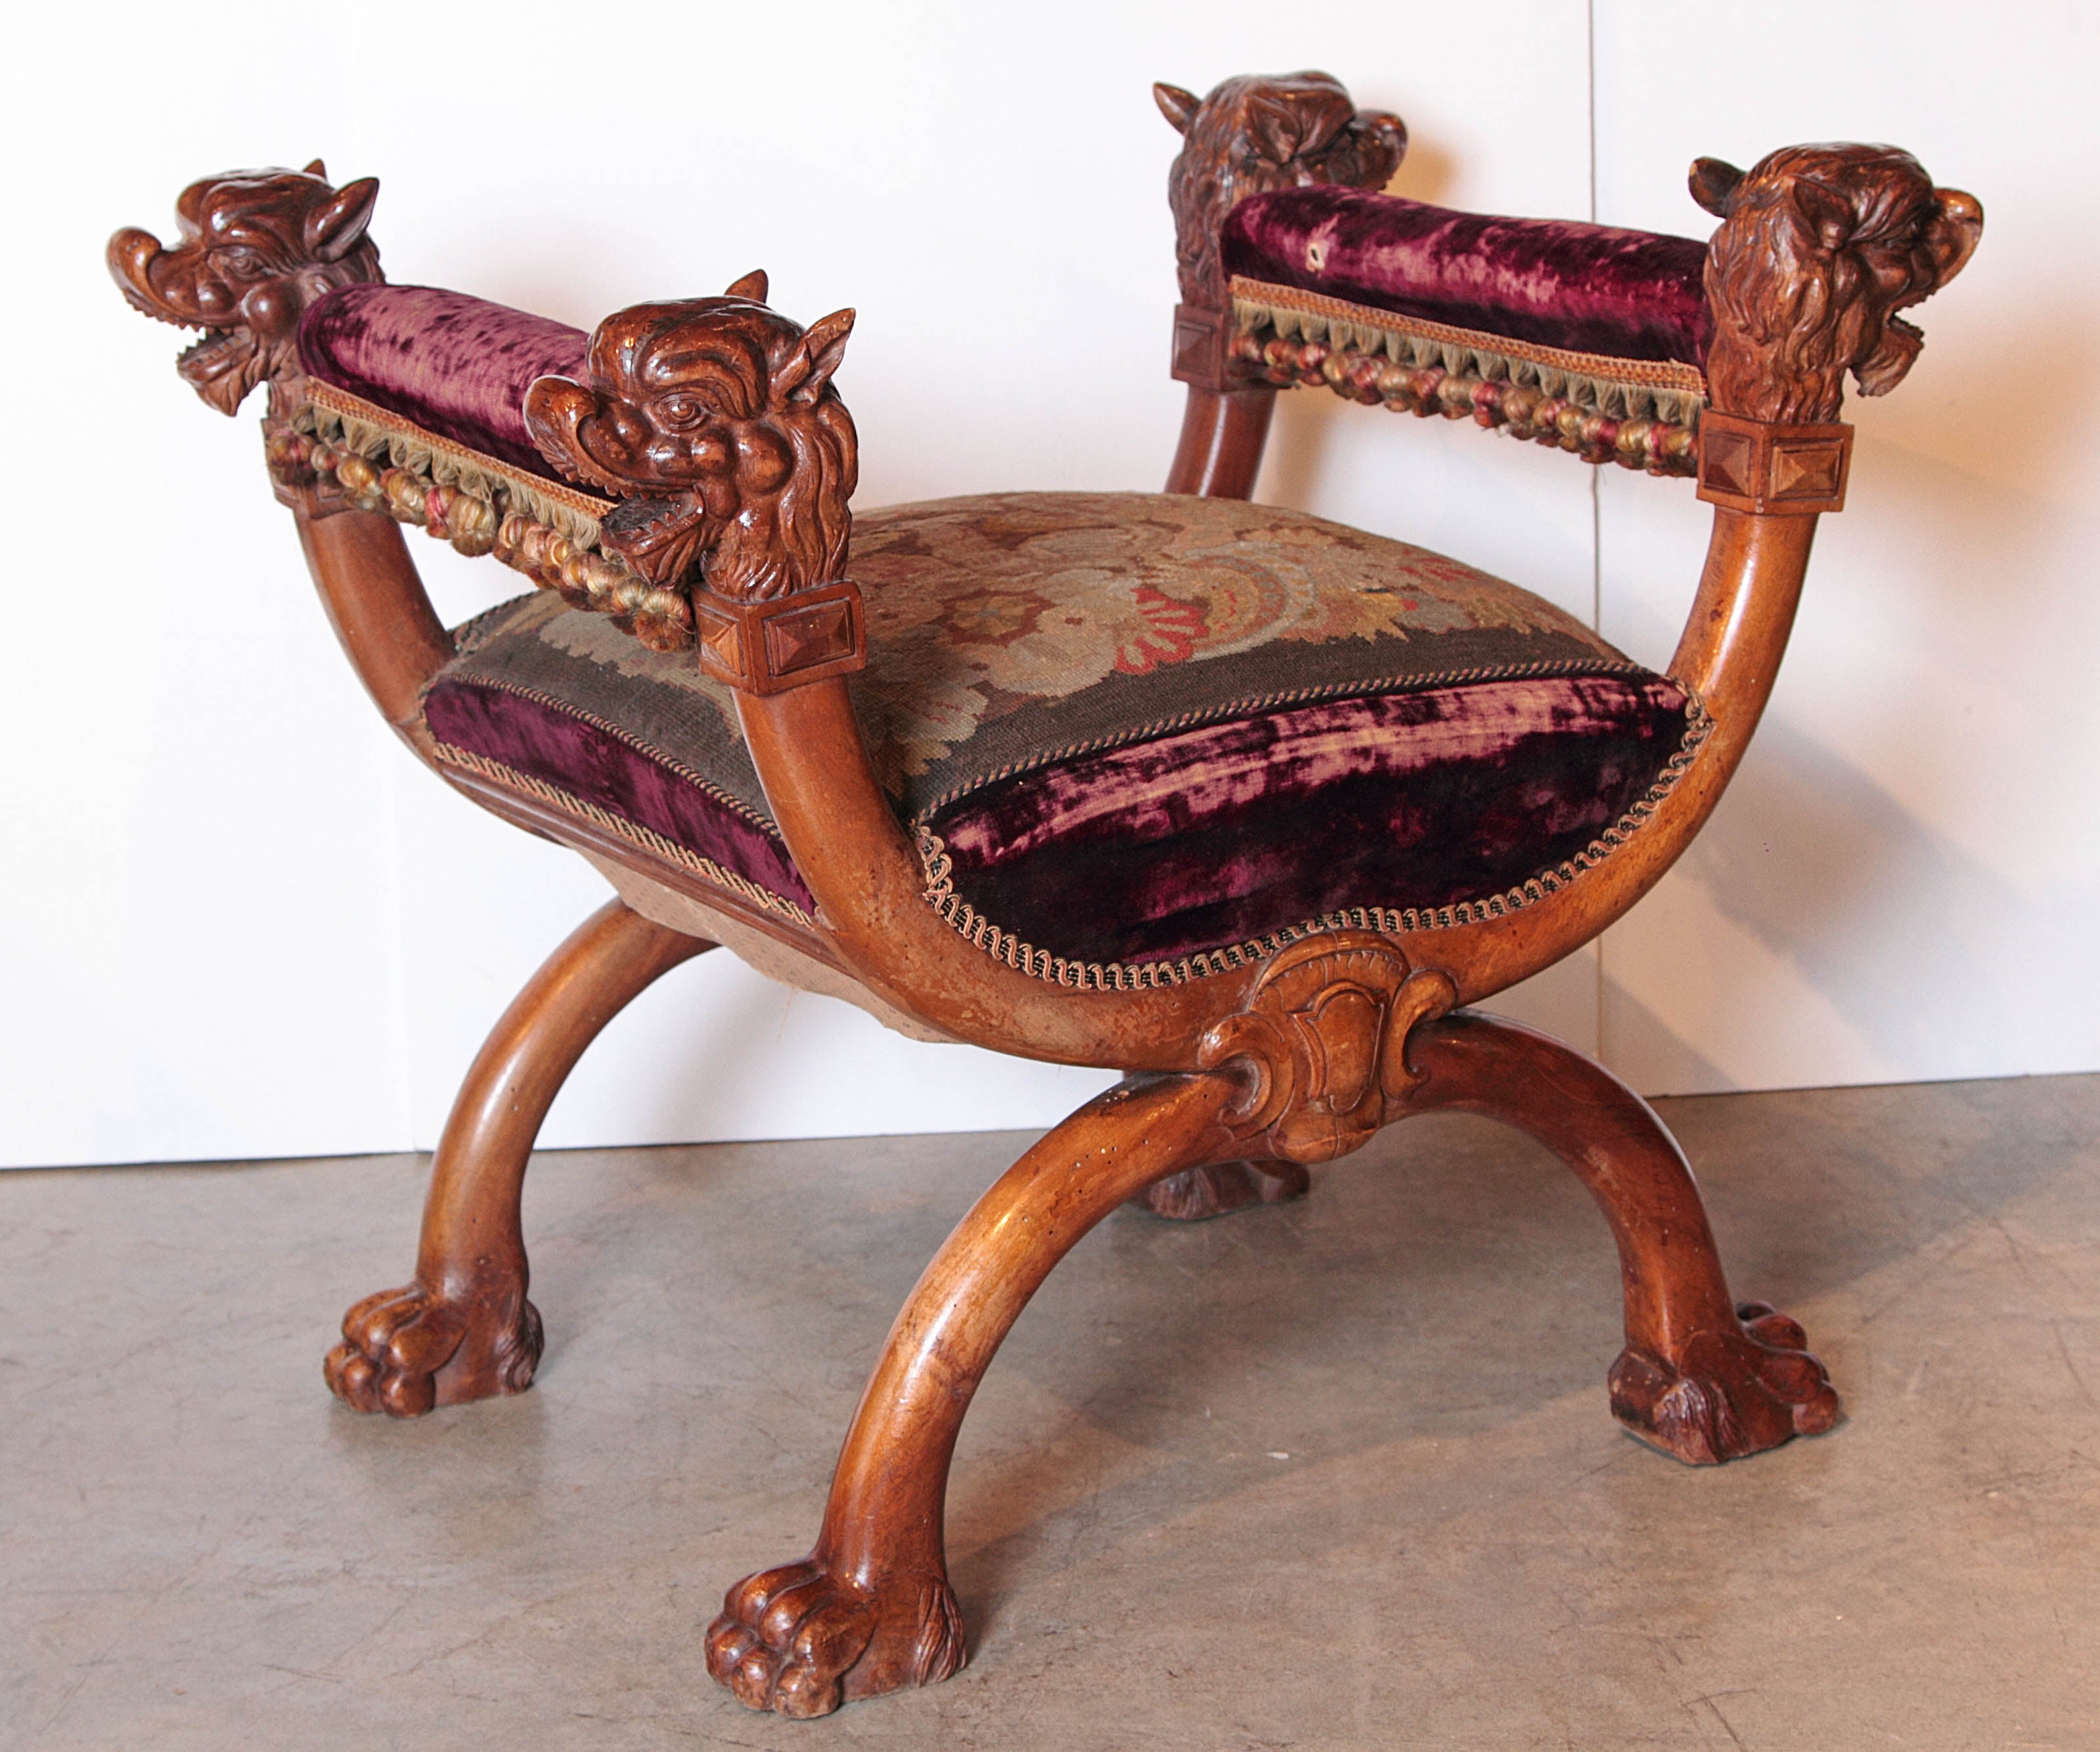 Antique Walnut Wood Curule Seat from France, circa 1880